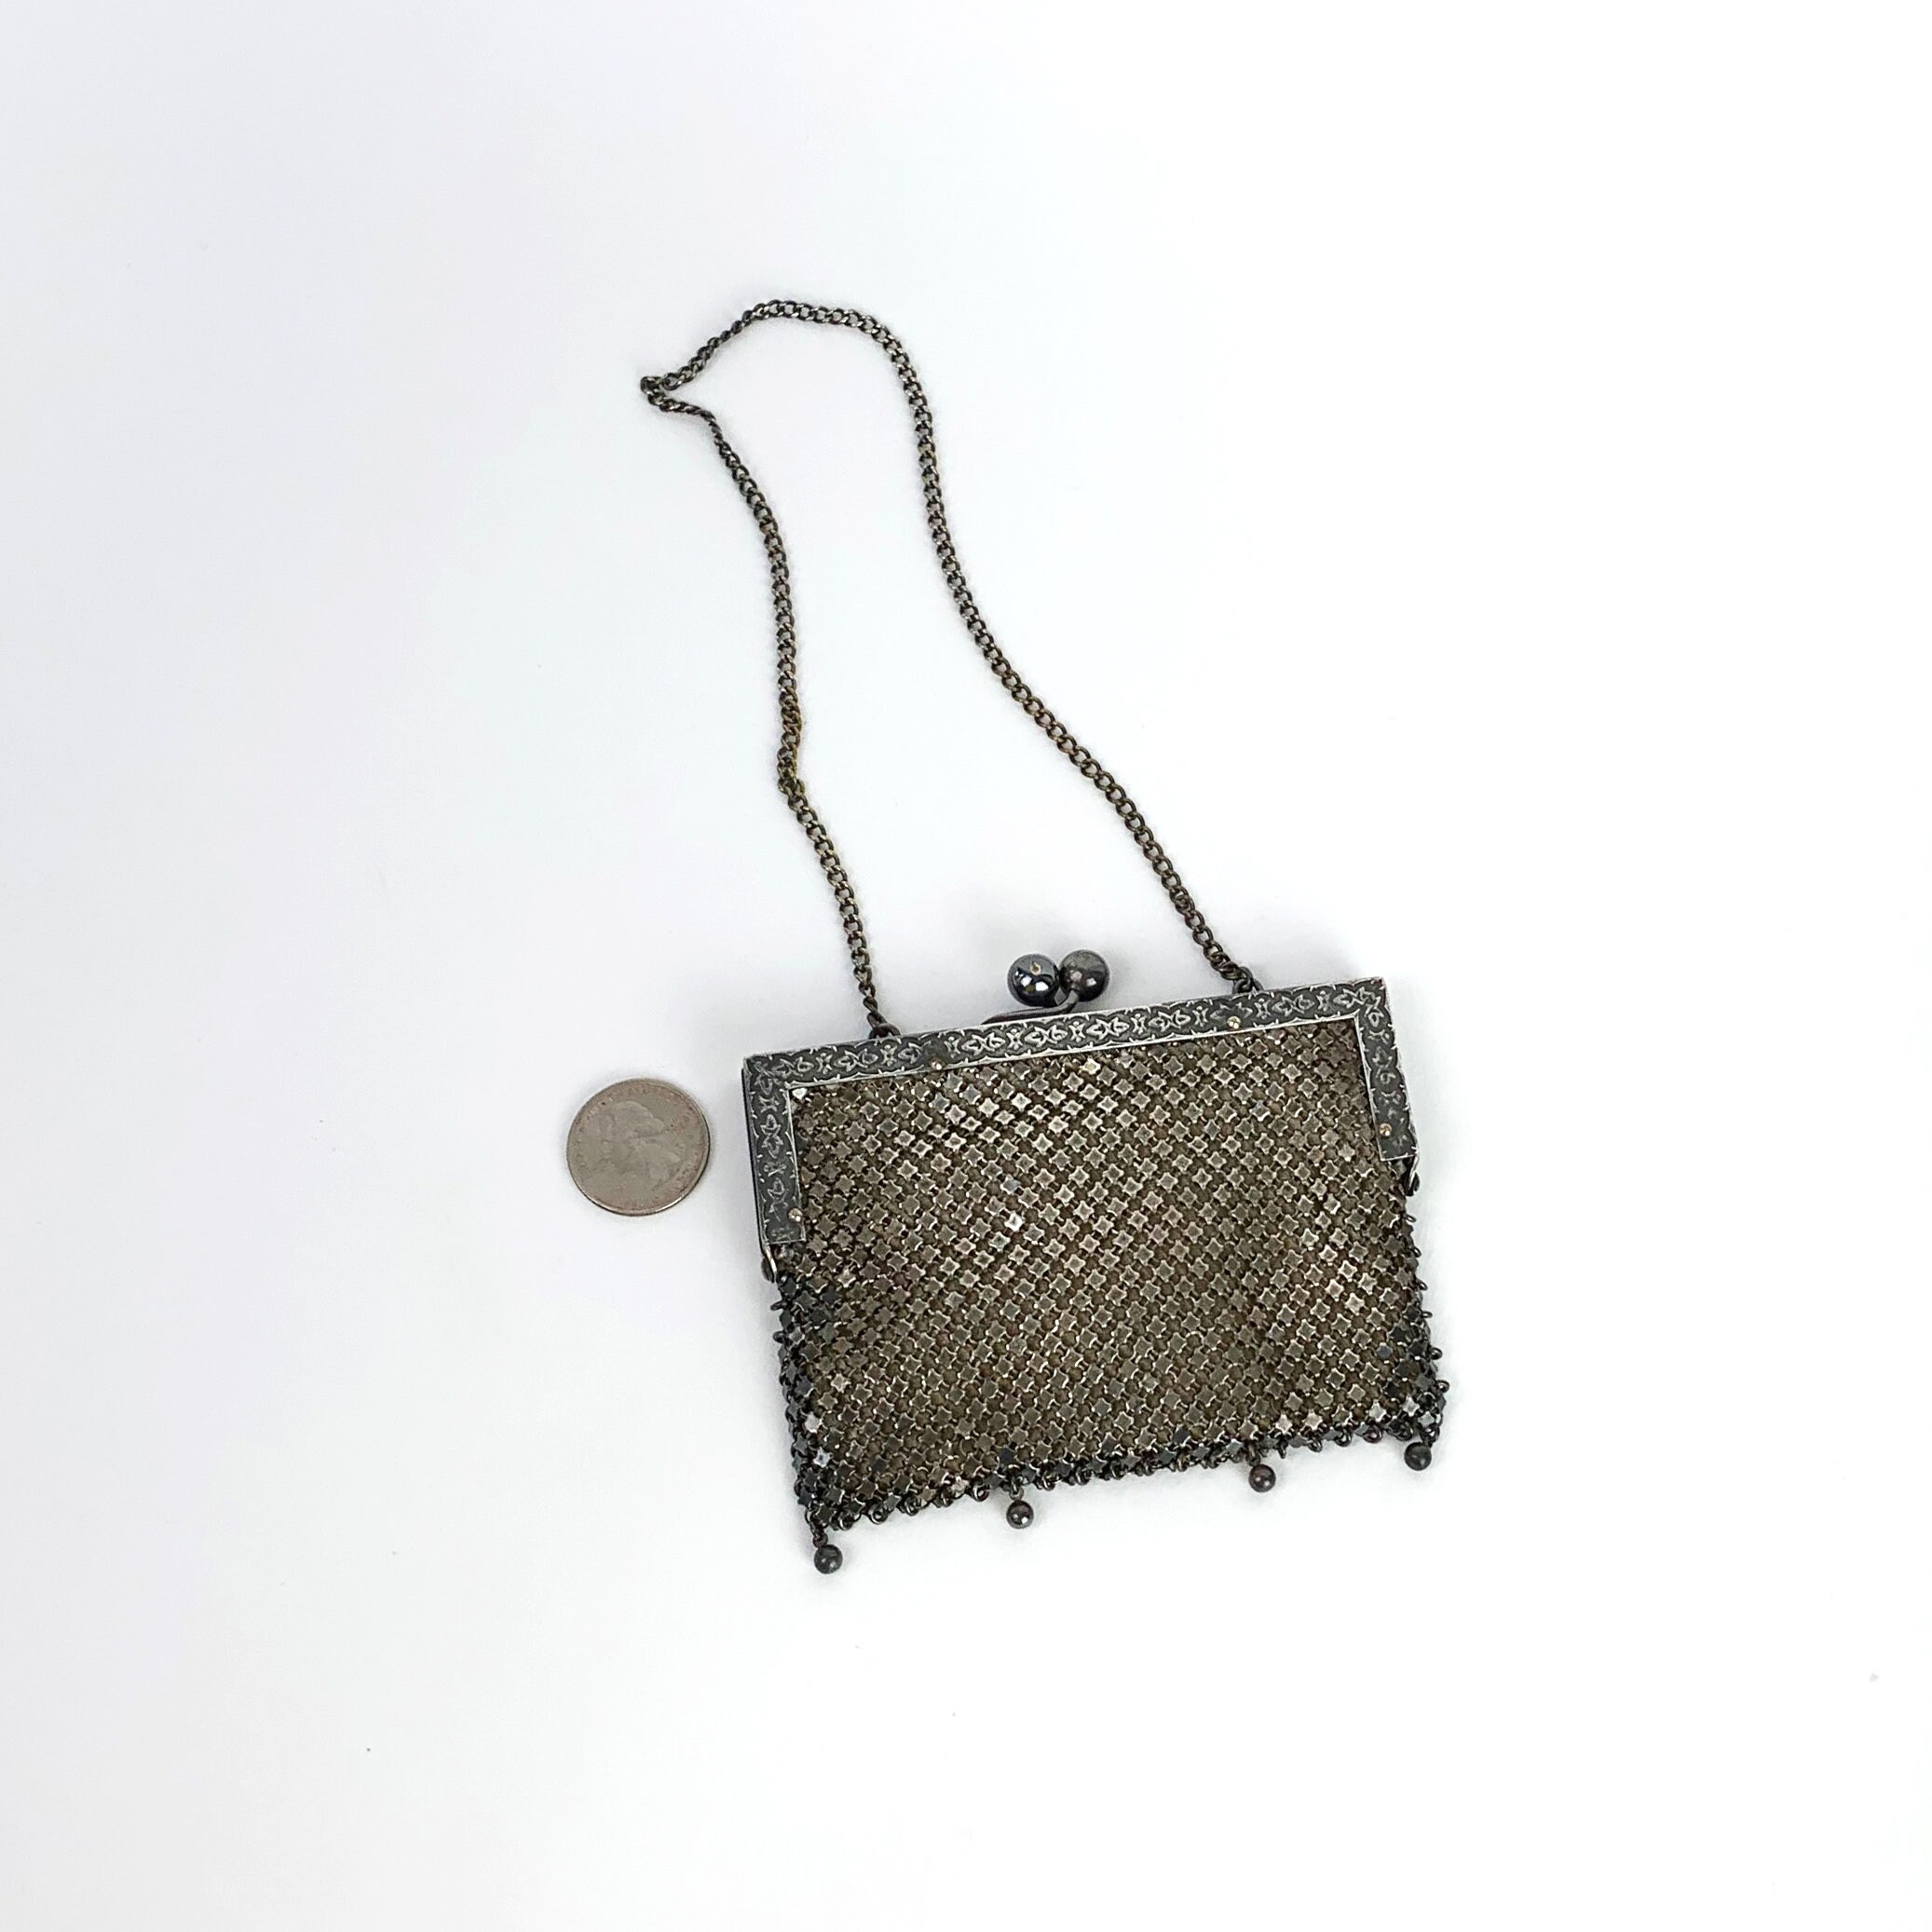 German Silver Metal Clutch With Handle, Indian Handmade Silver Party Sling  Bag, Proposal Gift for Her, Ethnic Handmade Vintage Style Purse - Etsy |  Handmade silver, Gifts for her, Sling bag